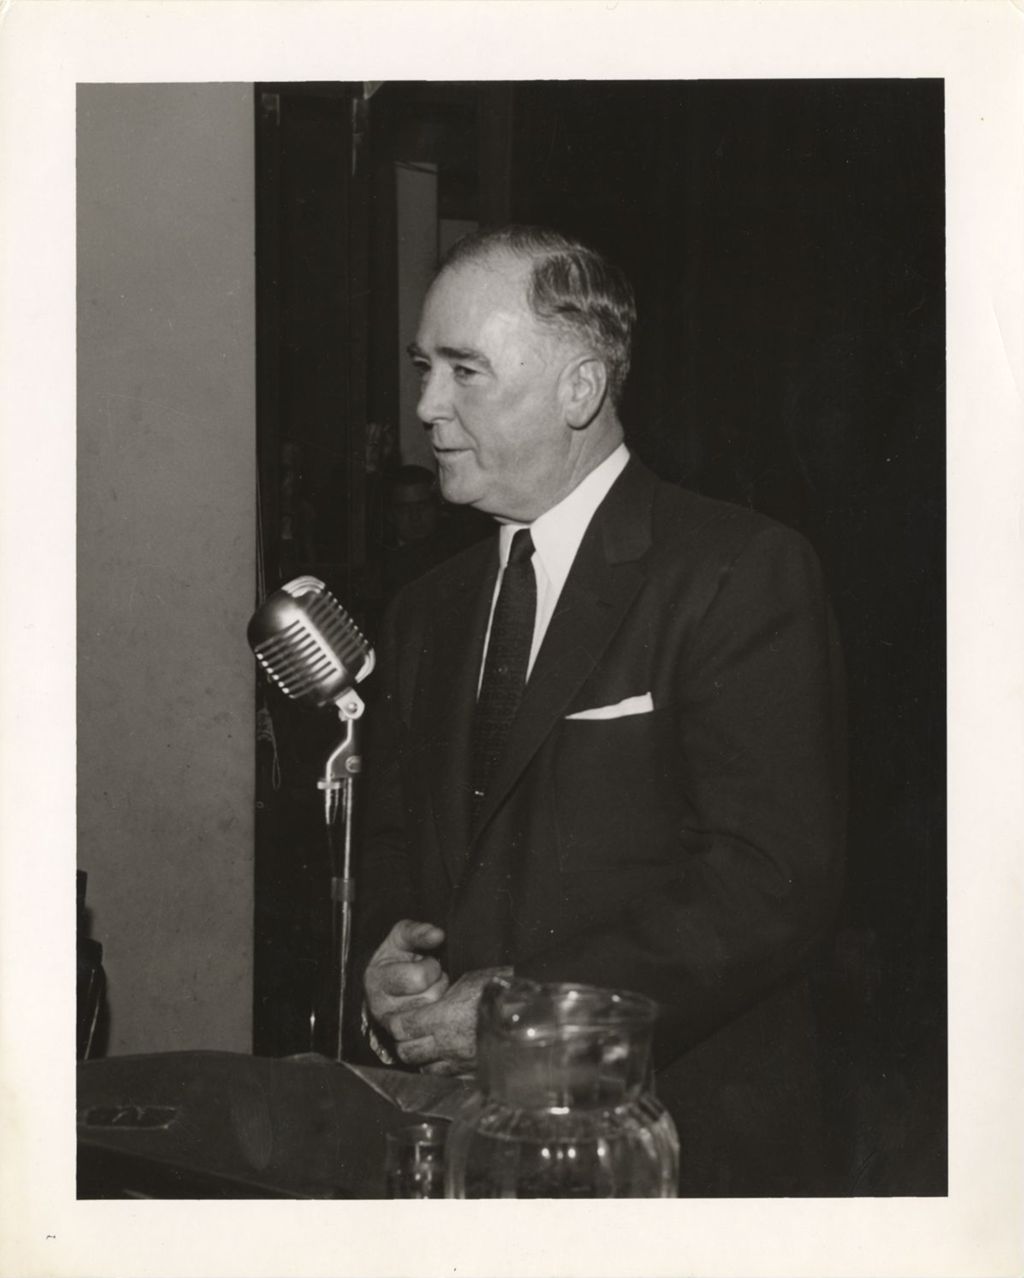 Miniature of William A. Lee at a microphone